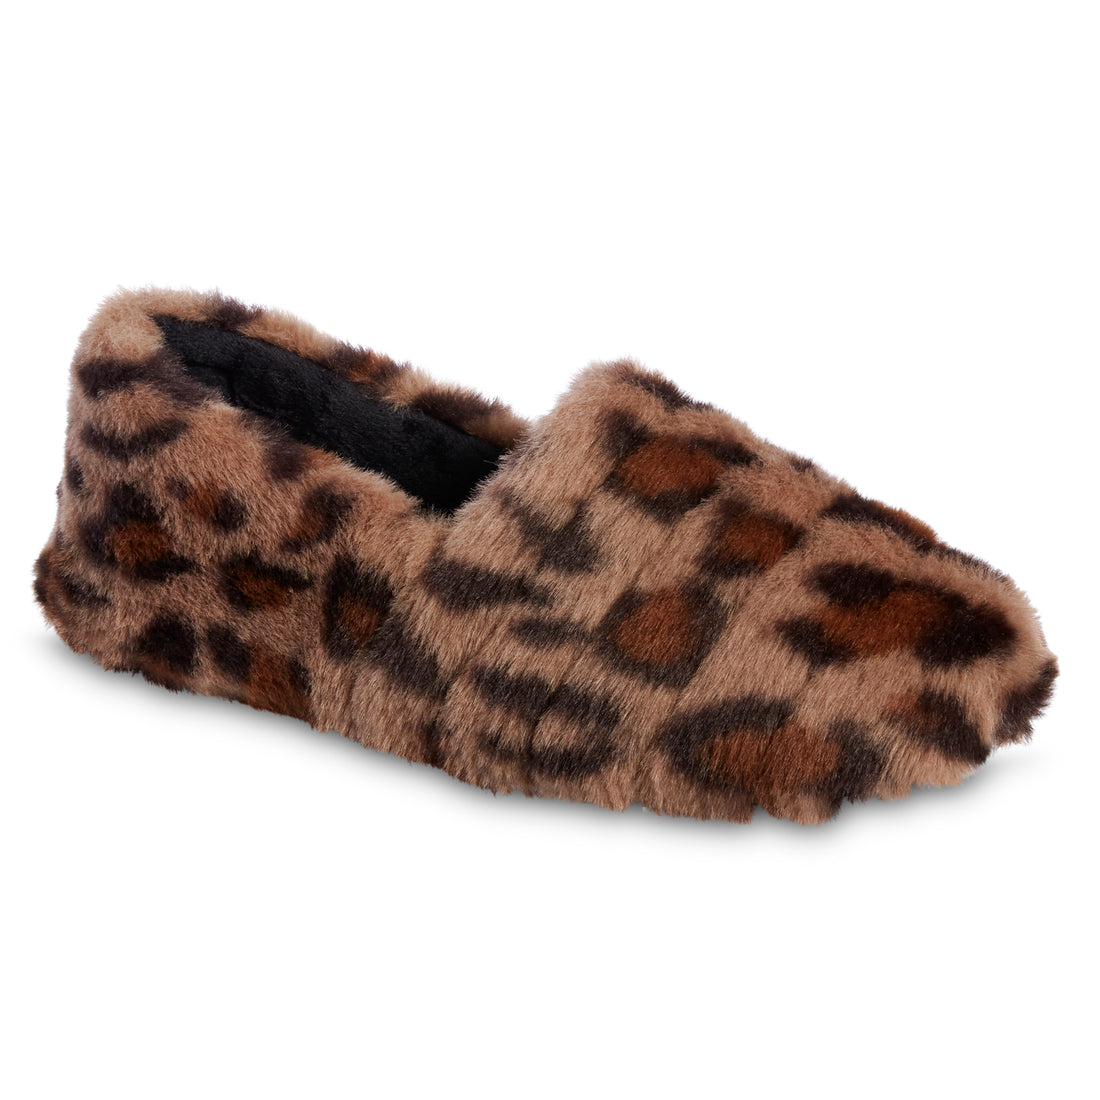 Isotoner Women's Faux Fur and Satin Tabby Slide Slippers Thistle 8-9